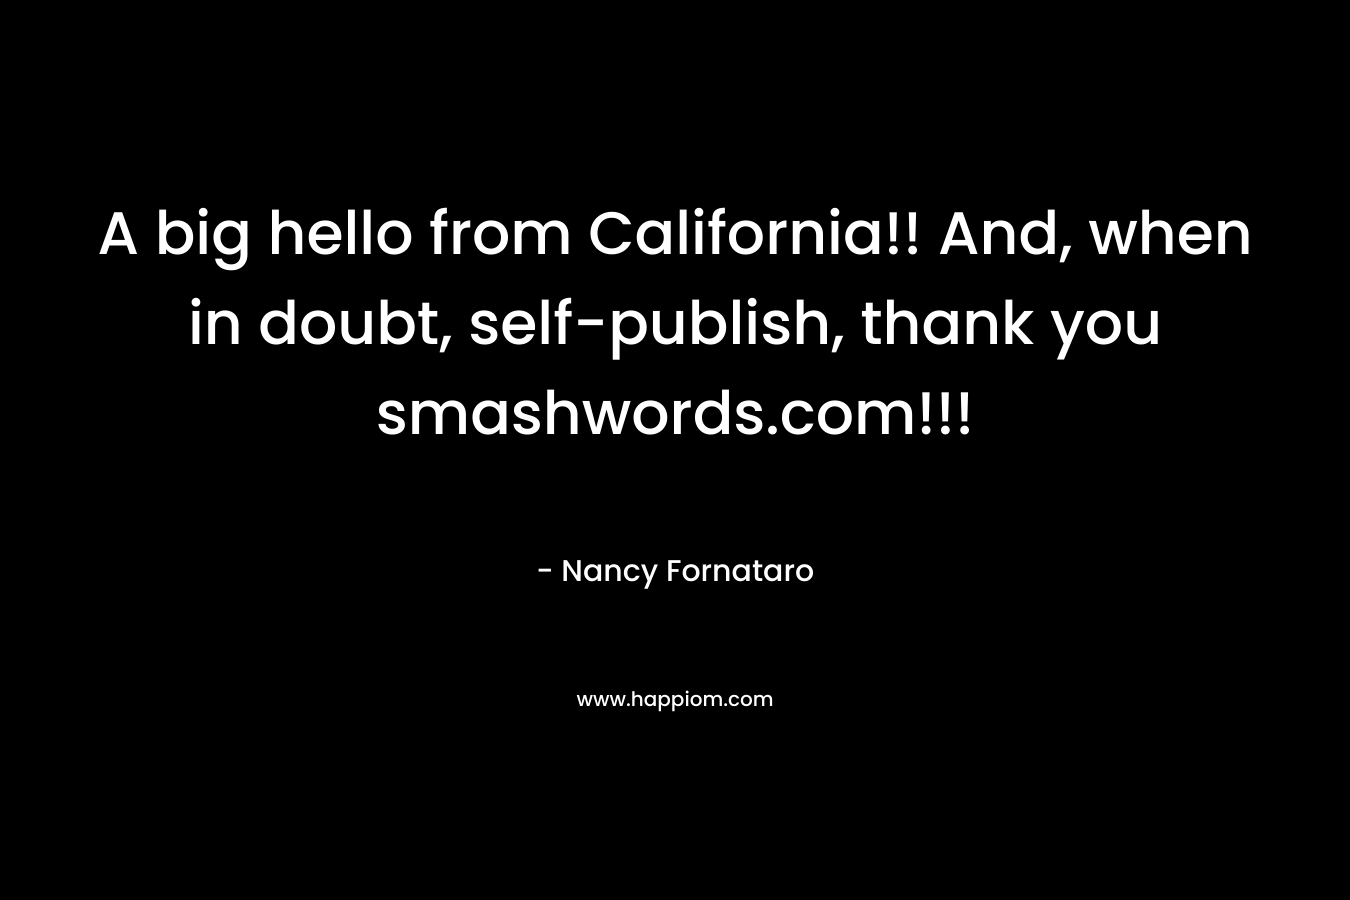 A big hello from California!! And, when in doubt, self-publish, thank you smashwords.com!!!